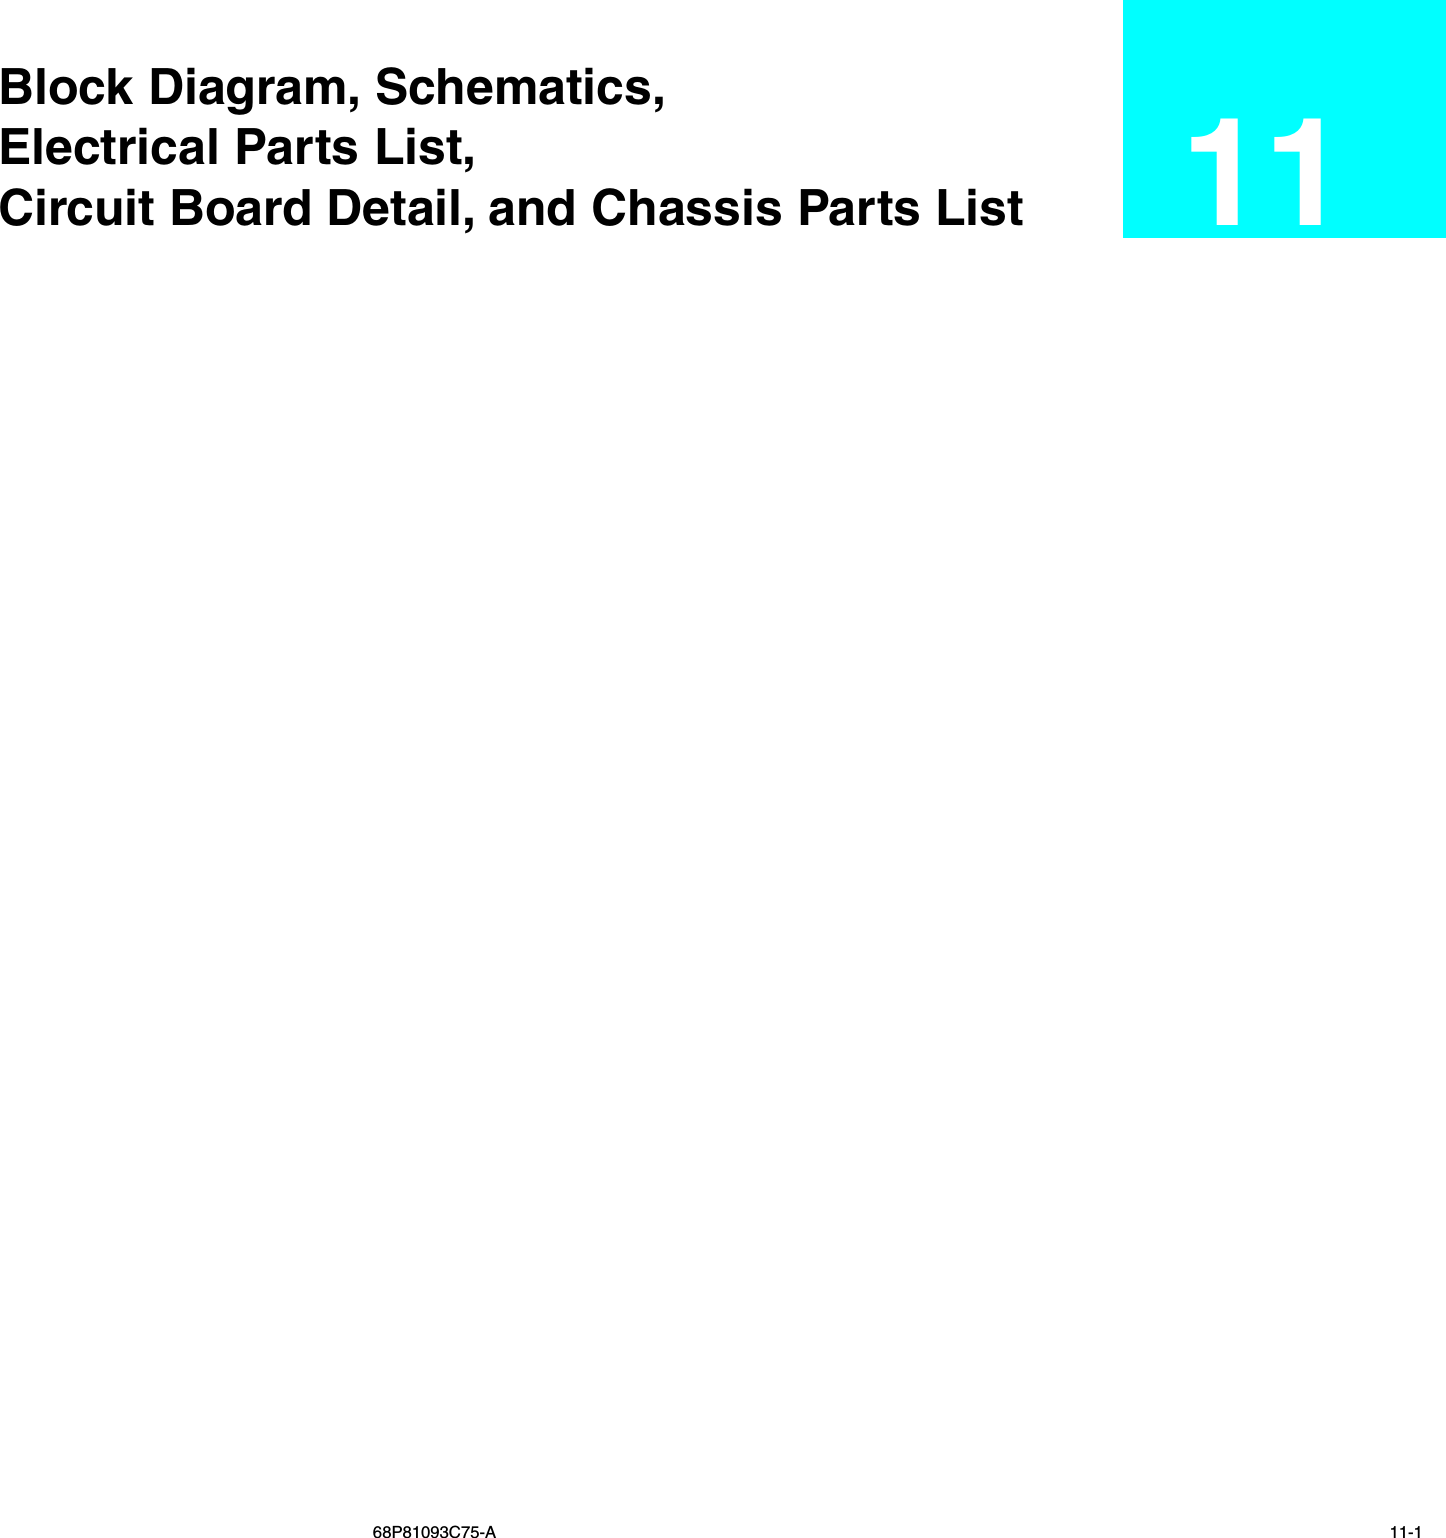  68P81093C75-A  11-1 Block Diagram, Schematics, Electrical Parts List, Circuit Board Detail, and Chassis Parts List  11